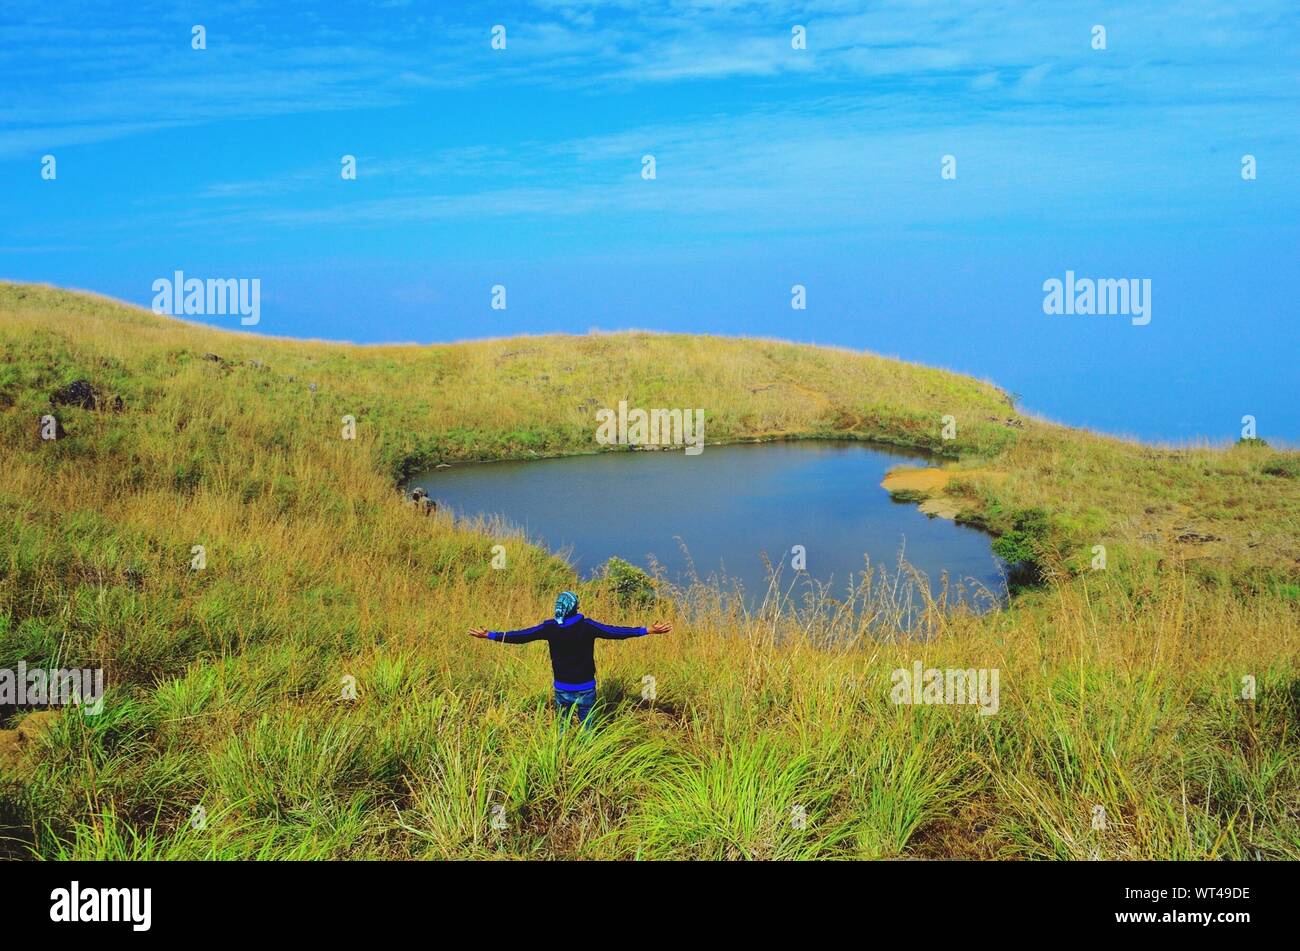 Man With Outstretched Arms Stock Photo